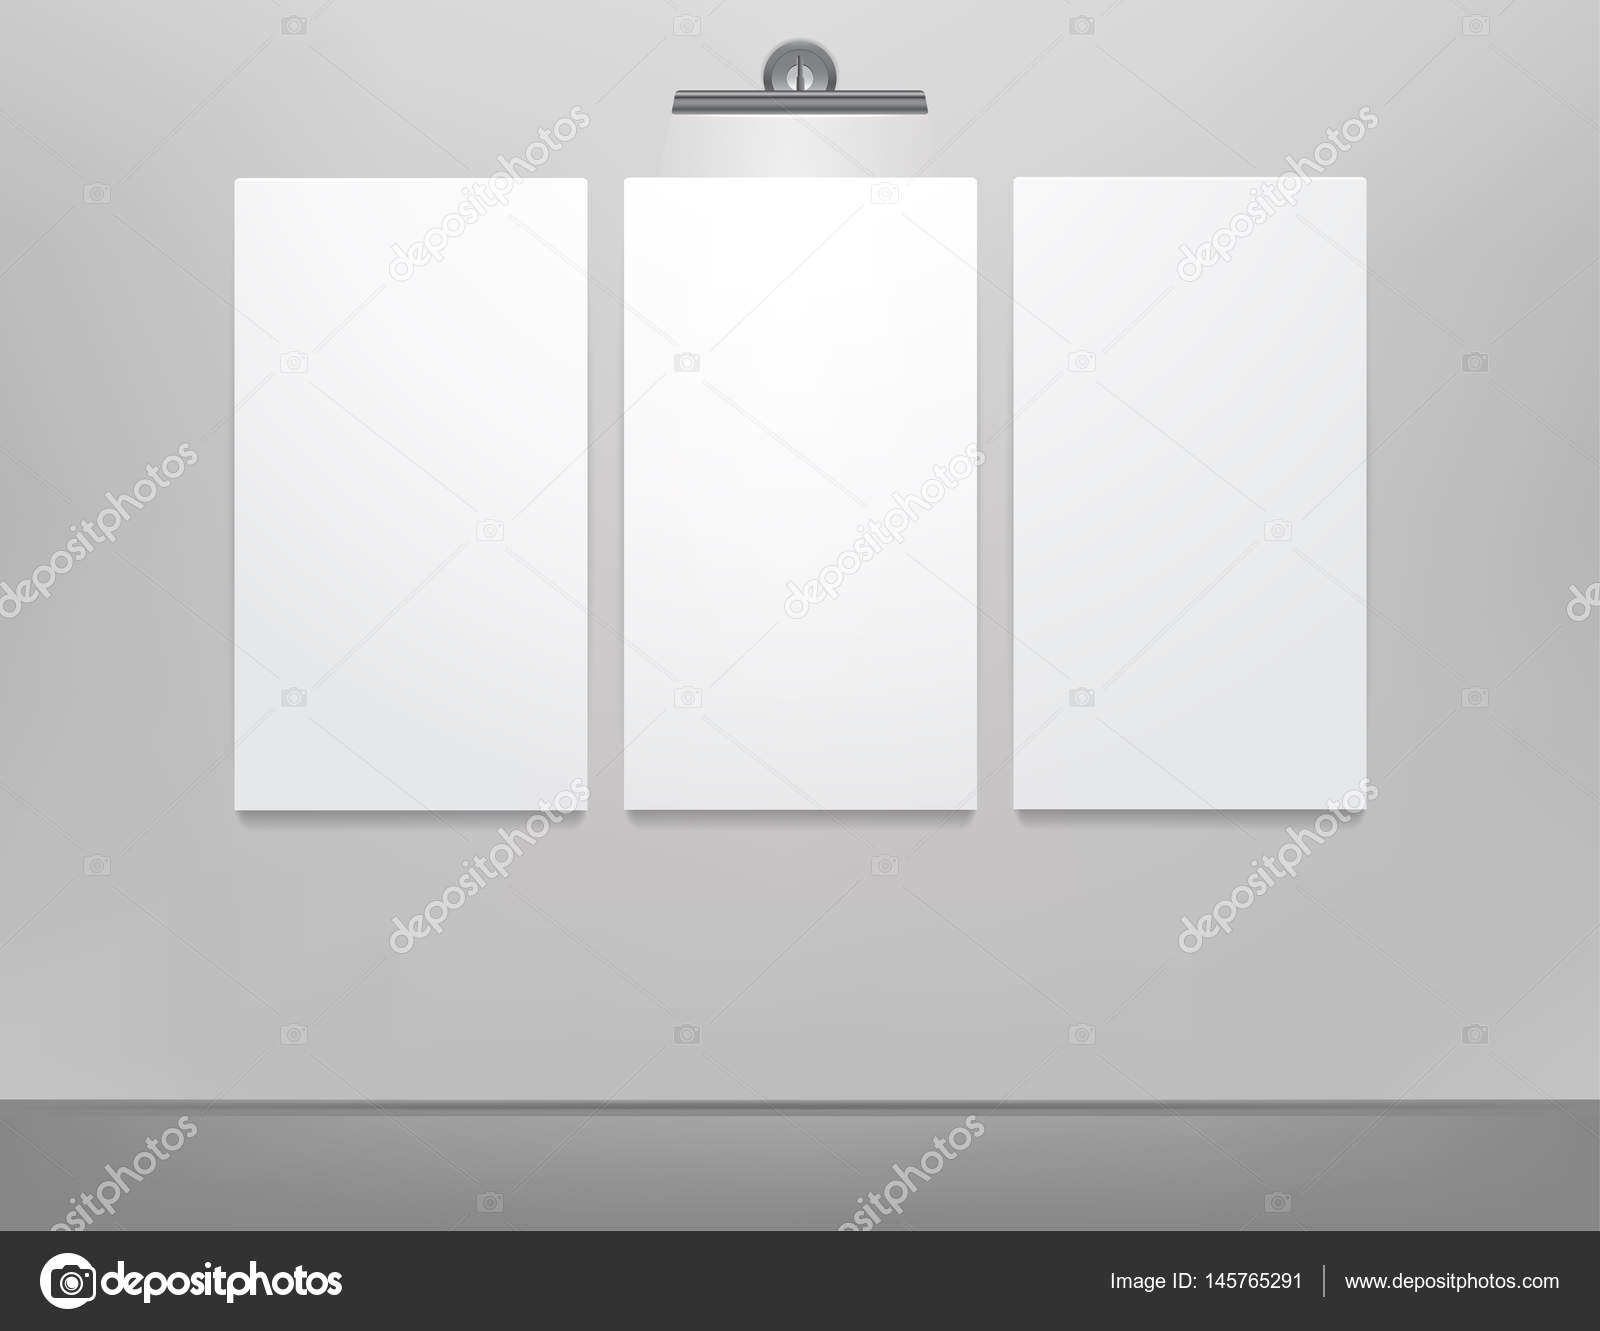 Triptych Template Three Clean Vertical Canvases On A Gray Wall Use For Exhibition Of Your Posters Photos Design Banners Presentation Vector Eps 10 Stock Vector Image By C Alextrou92 Gmail Com 145765291